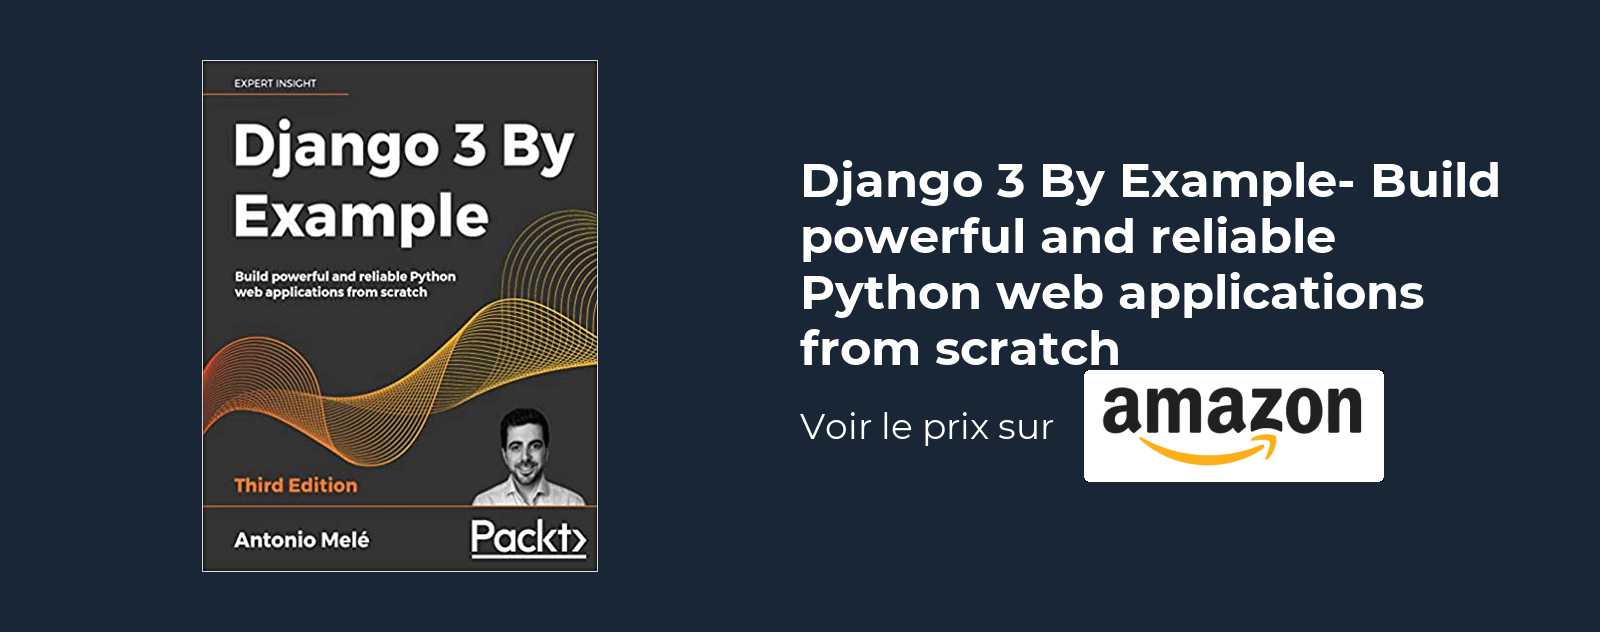 Django 4 By Example- Build powerful and reliable Python web applications from scratch